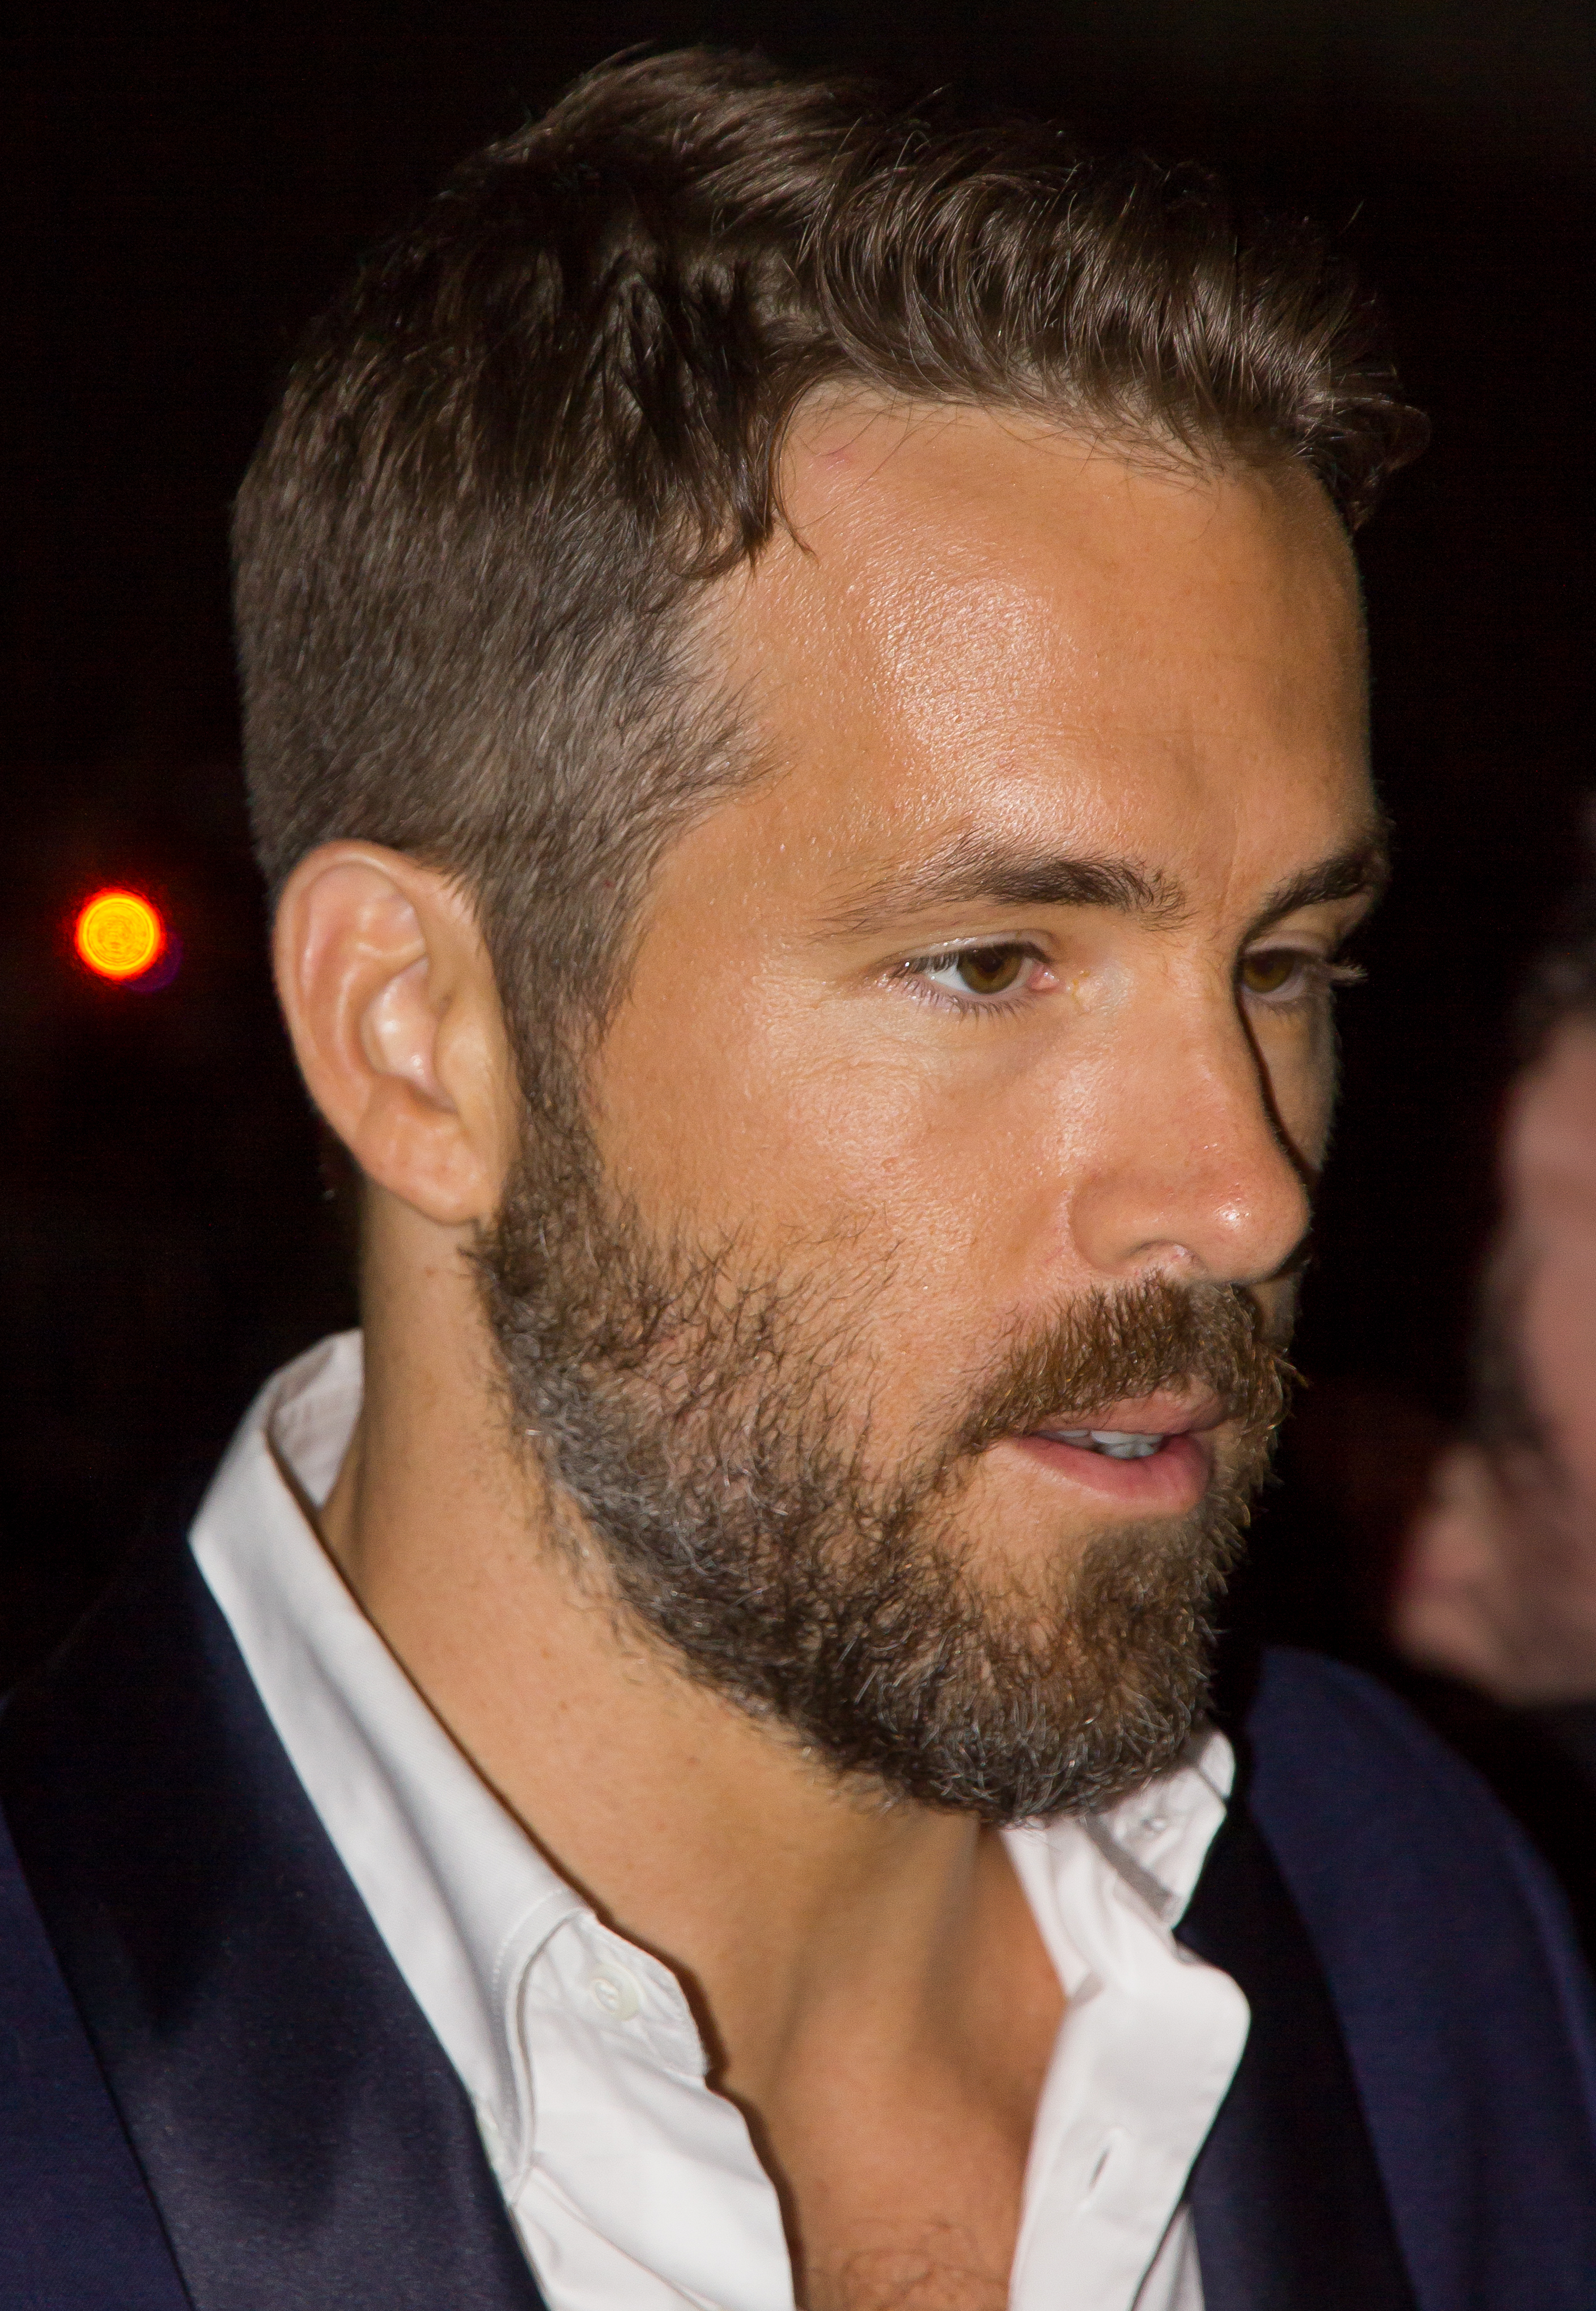 See Bedford's Ryan Reynolds (and his bushy beard) in the first